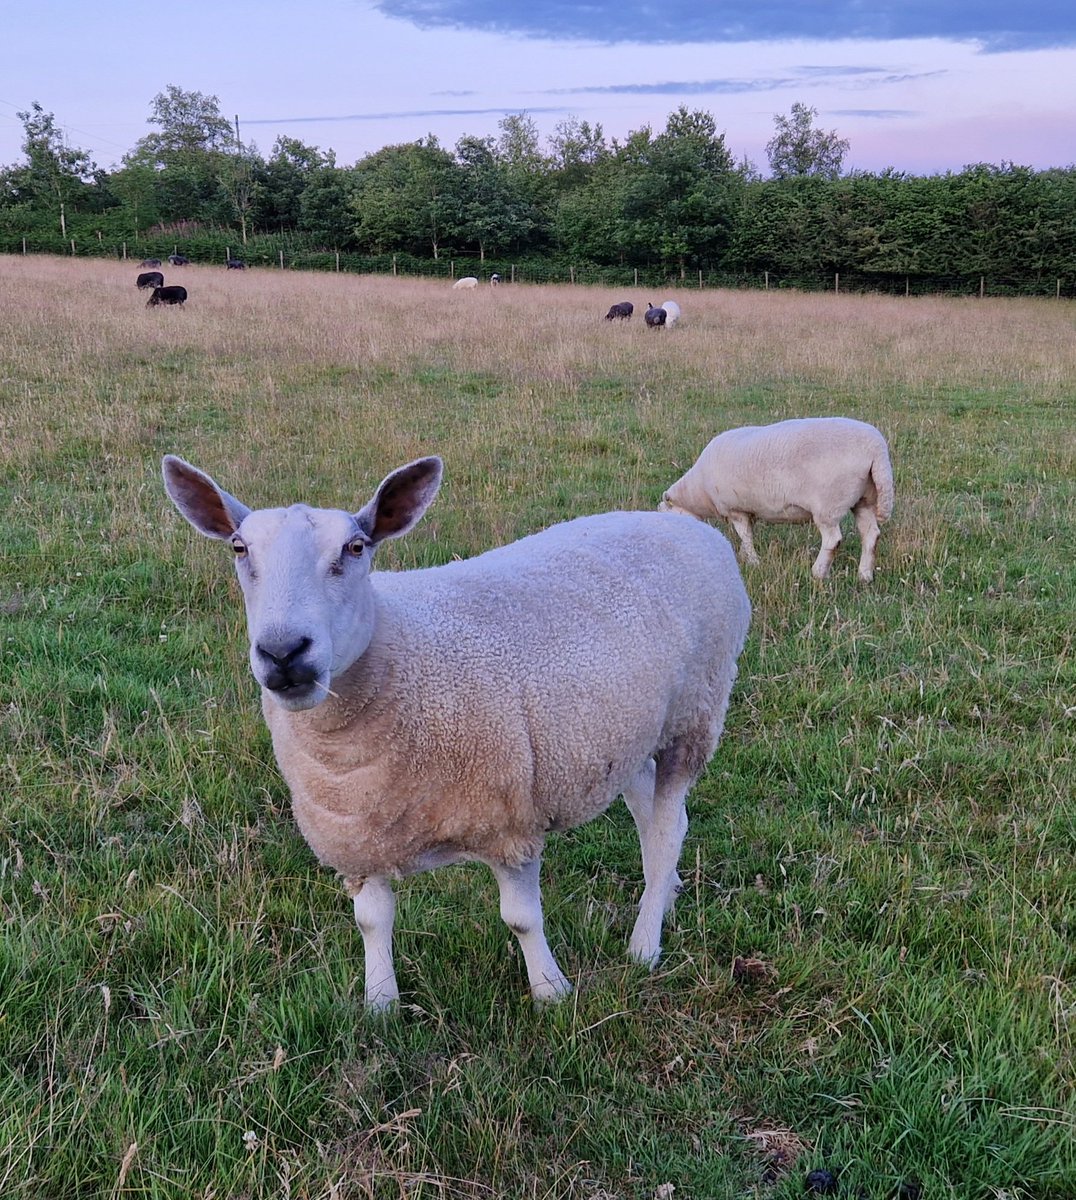 Adele says 'What's the gossip Mum? I'm all ears'🤣🤣

#animalsanctuary #sheep365 #bluefacedleicester #nonprofit #Amazonwishlist #animallovers #foreverhome #sheeple 

woollypatchworkshe.wixsite.com/website